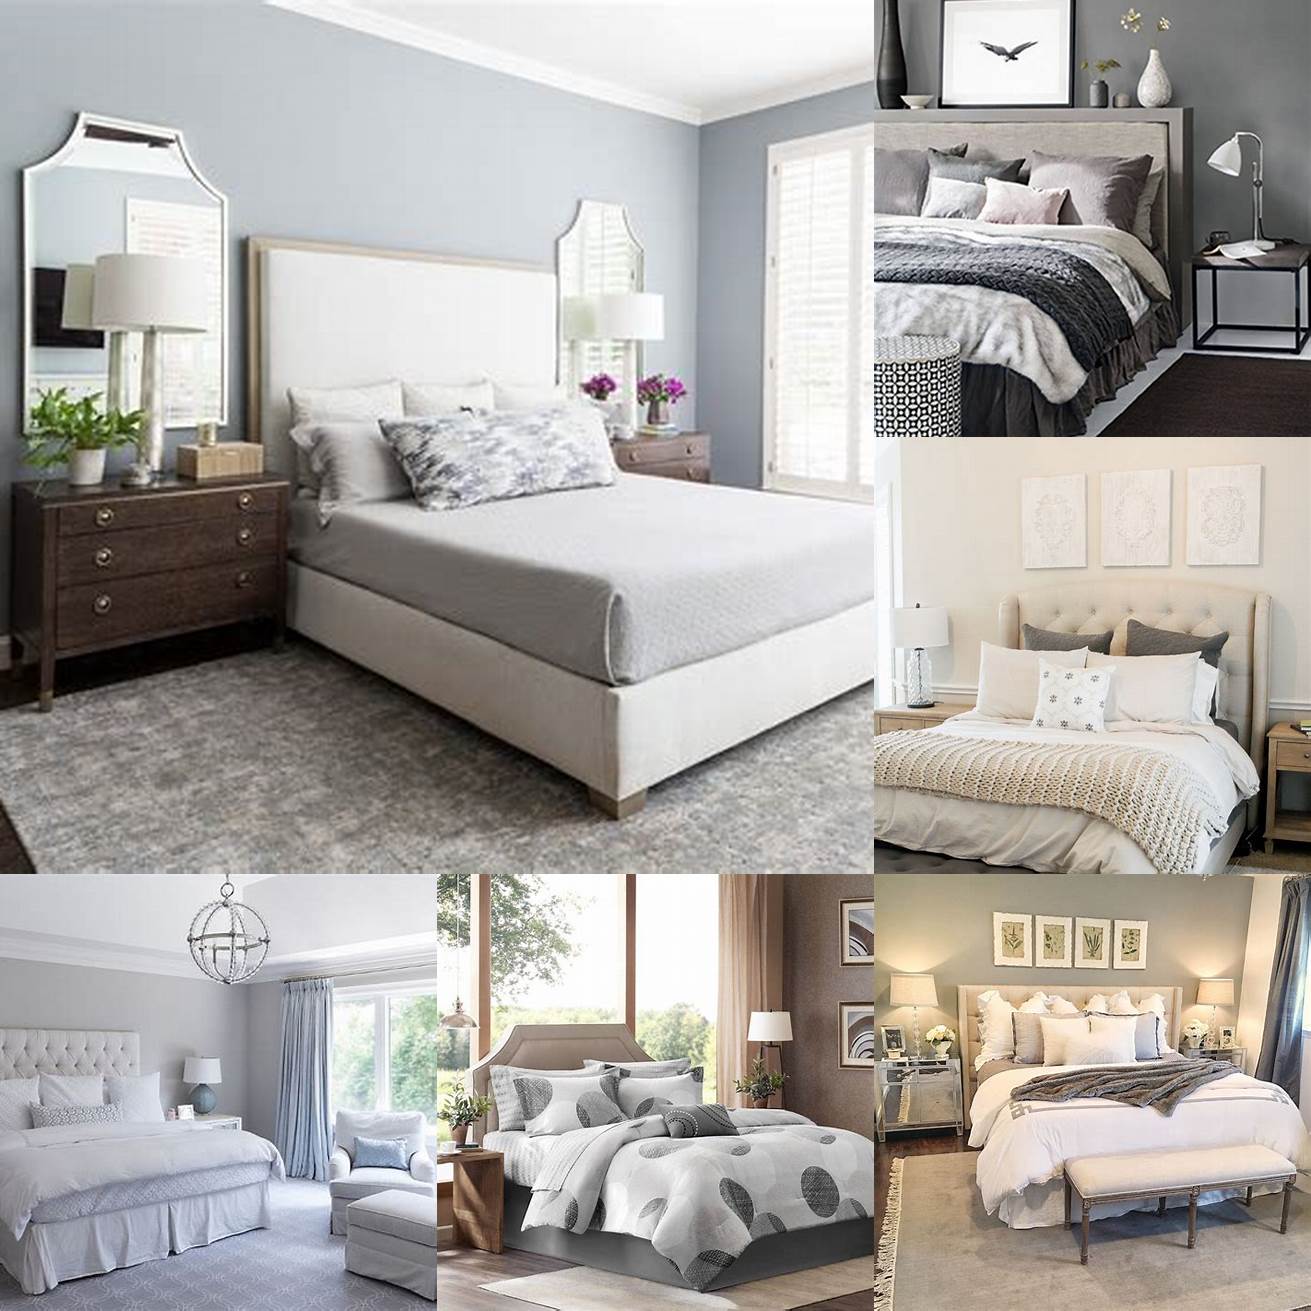 Neutral colors such as gray are a popular choice in modern bedding